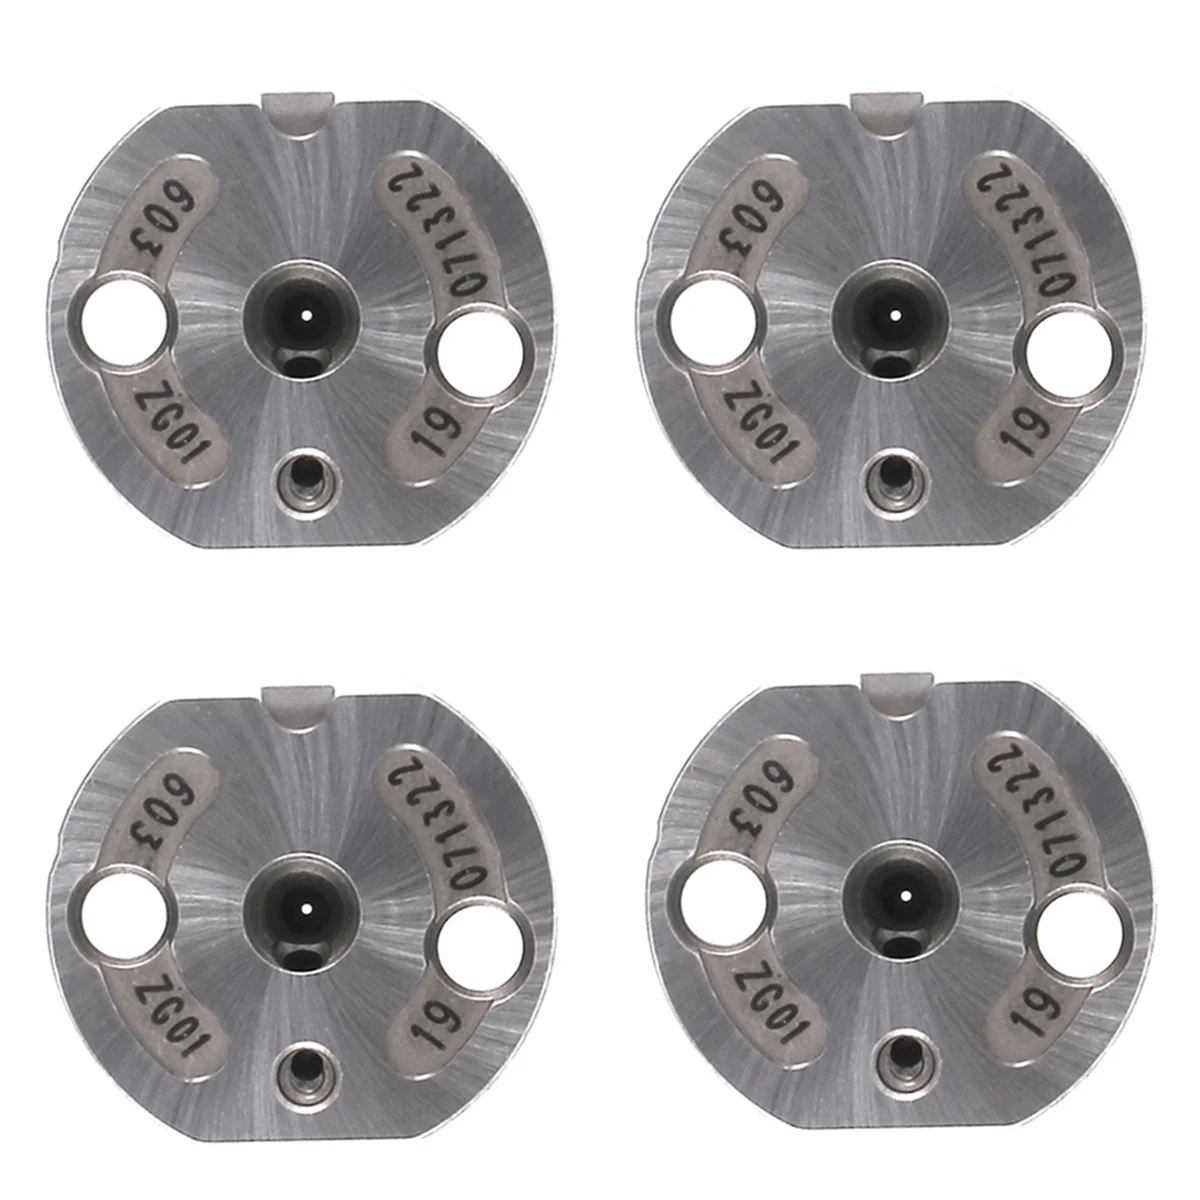 

4X New Crude Oil Injector Orifice Control Valve Plate 19 for Injector 095000-5341 095000-5600 095000-8903